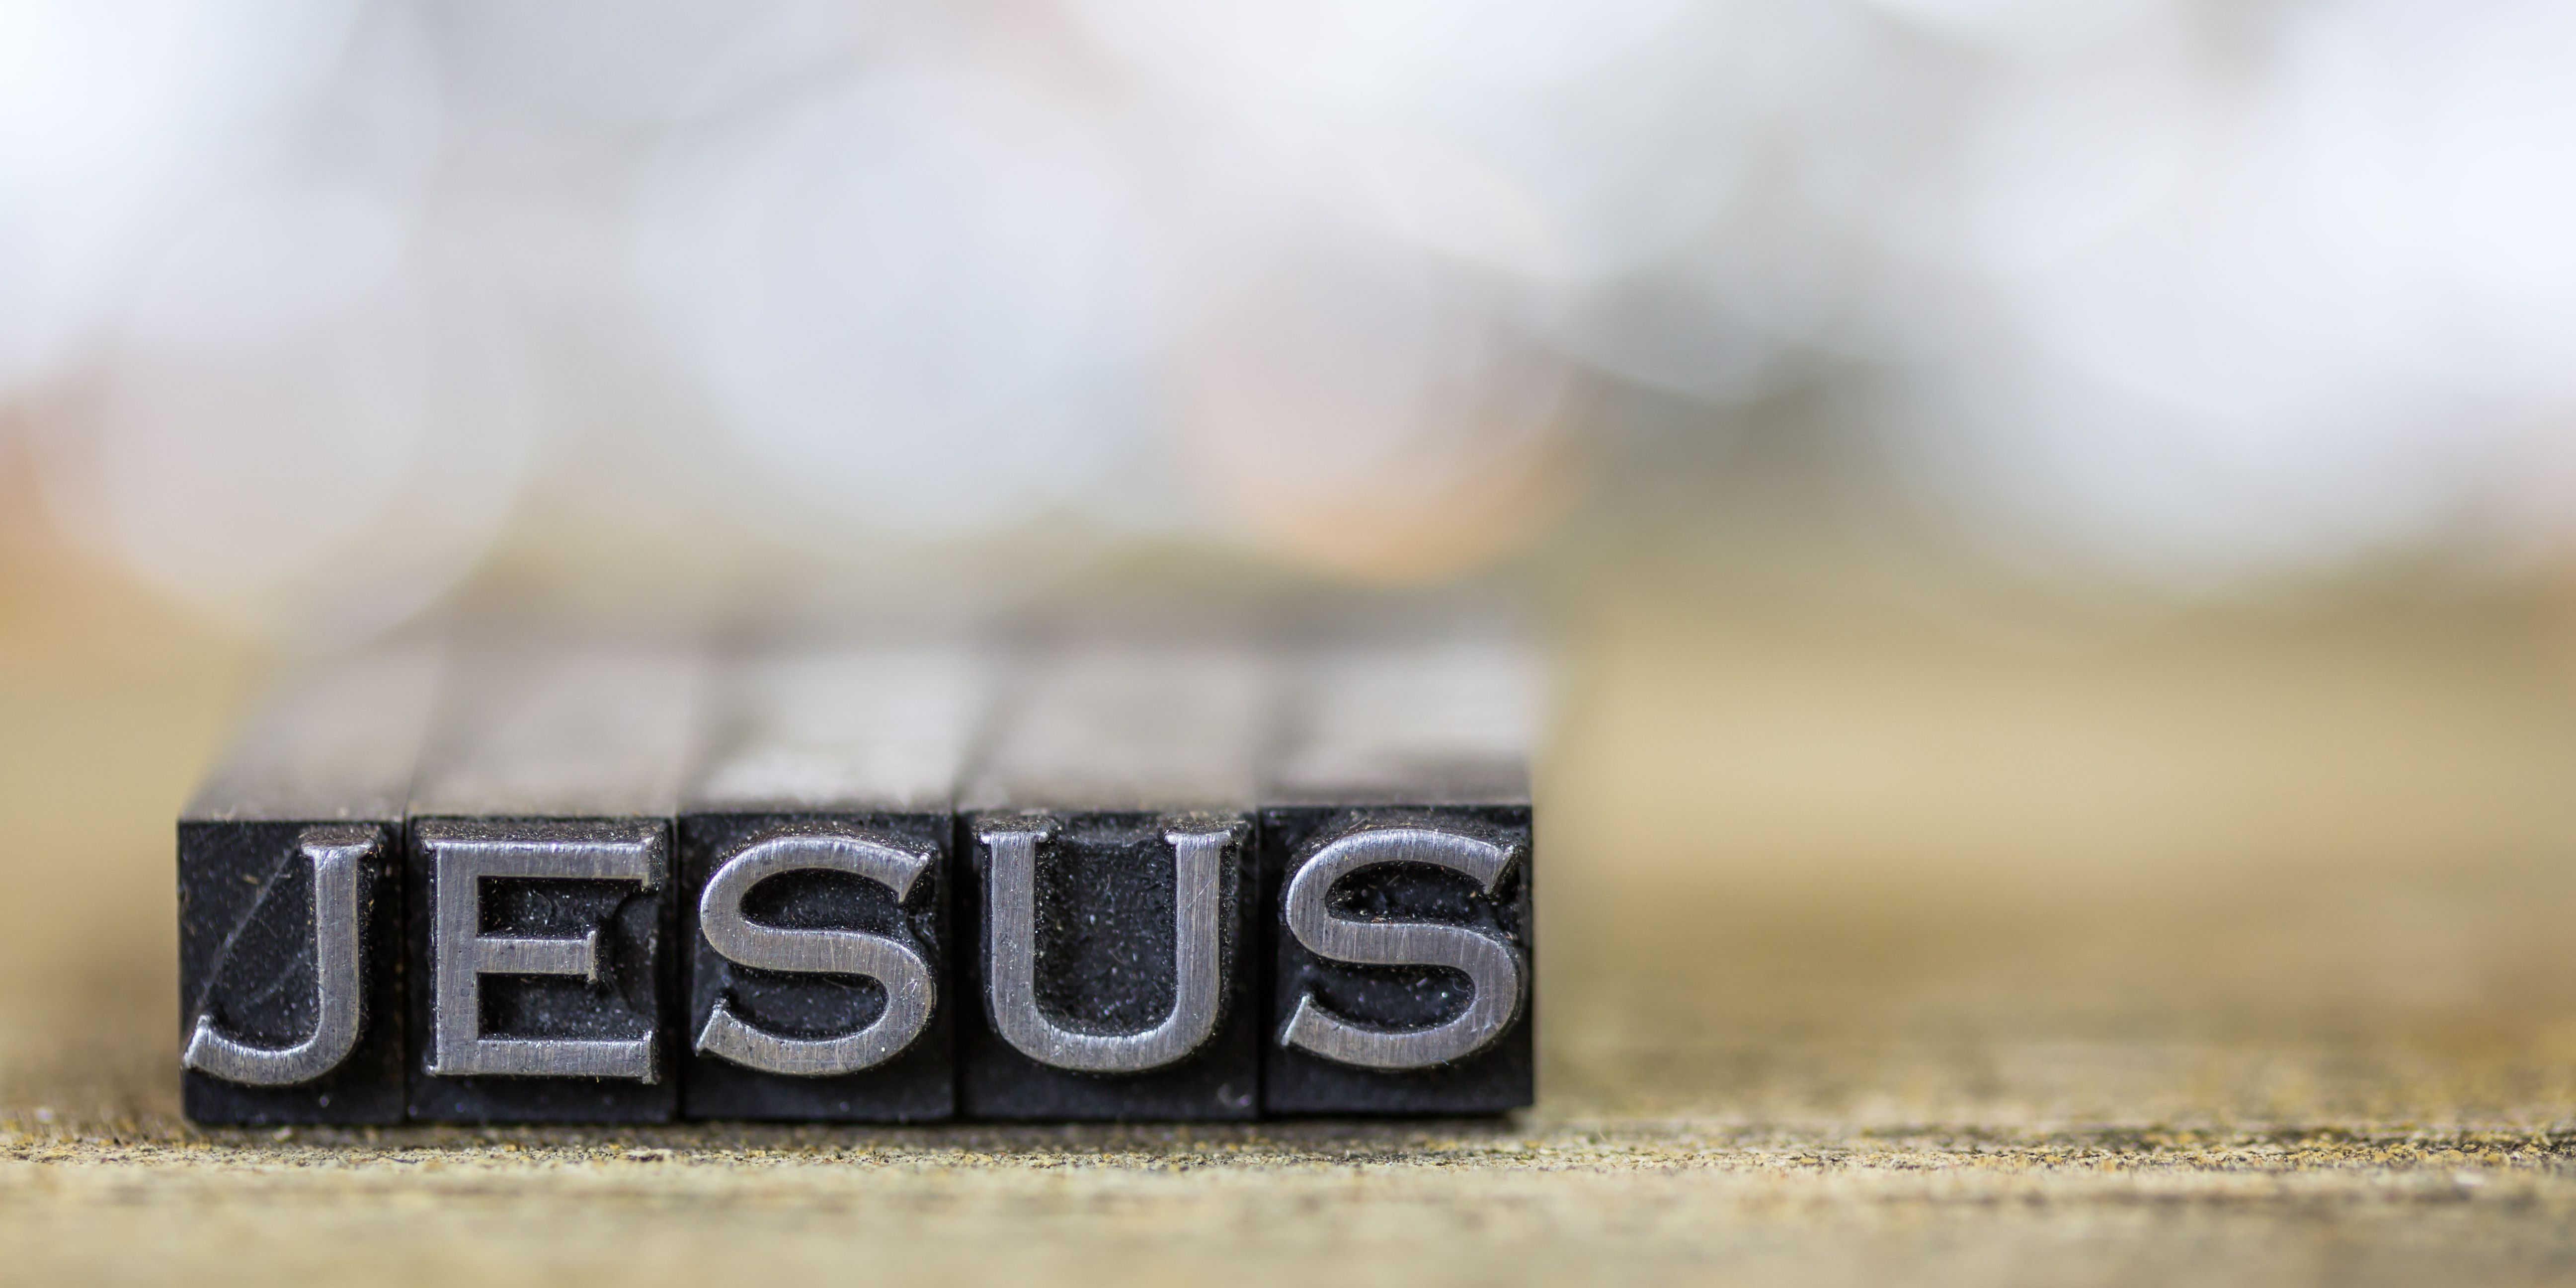 JESUS spelled out in typeset